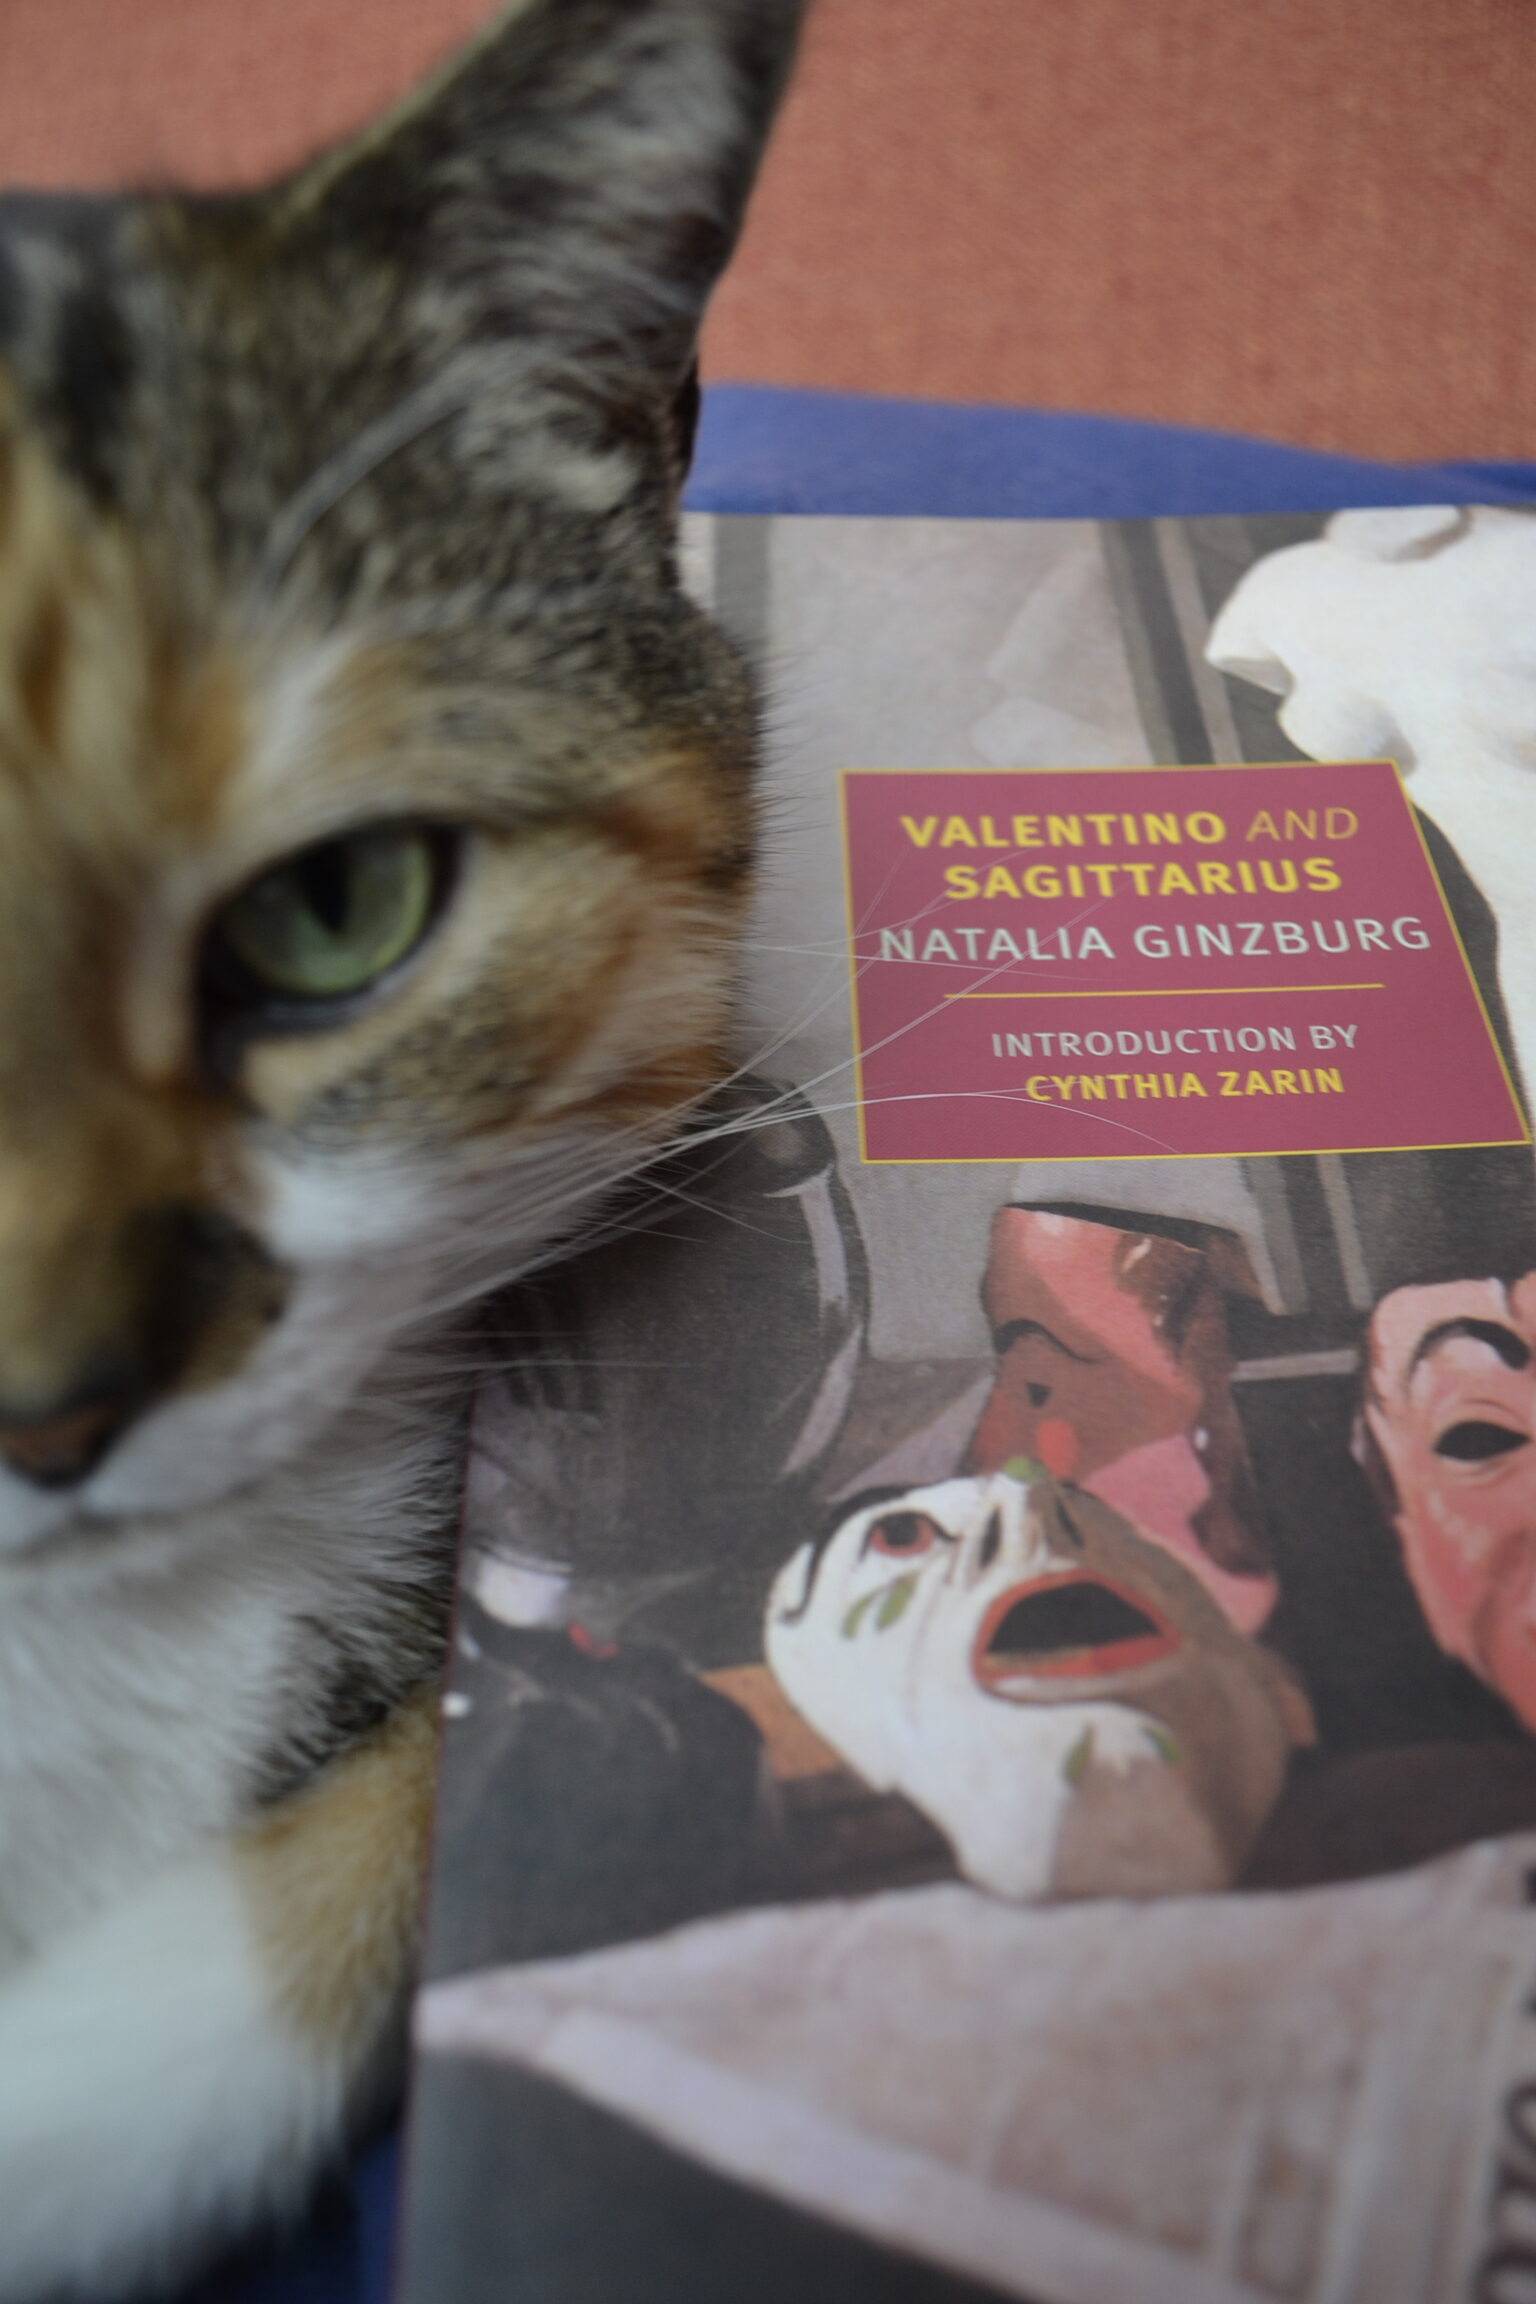 A green-eyed cat leans against a book titled 'Valentino and Sagittarius'.